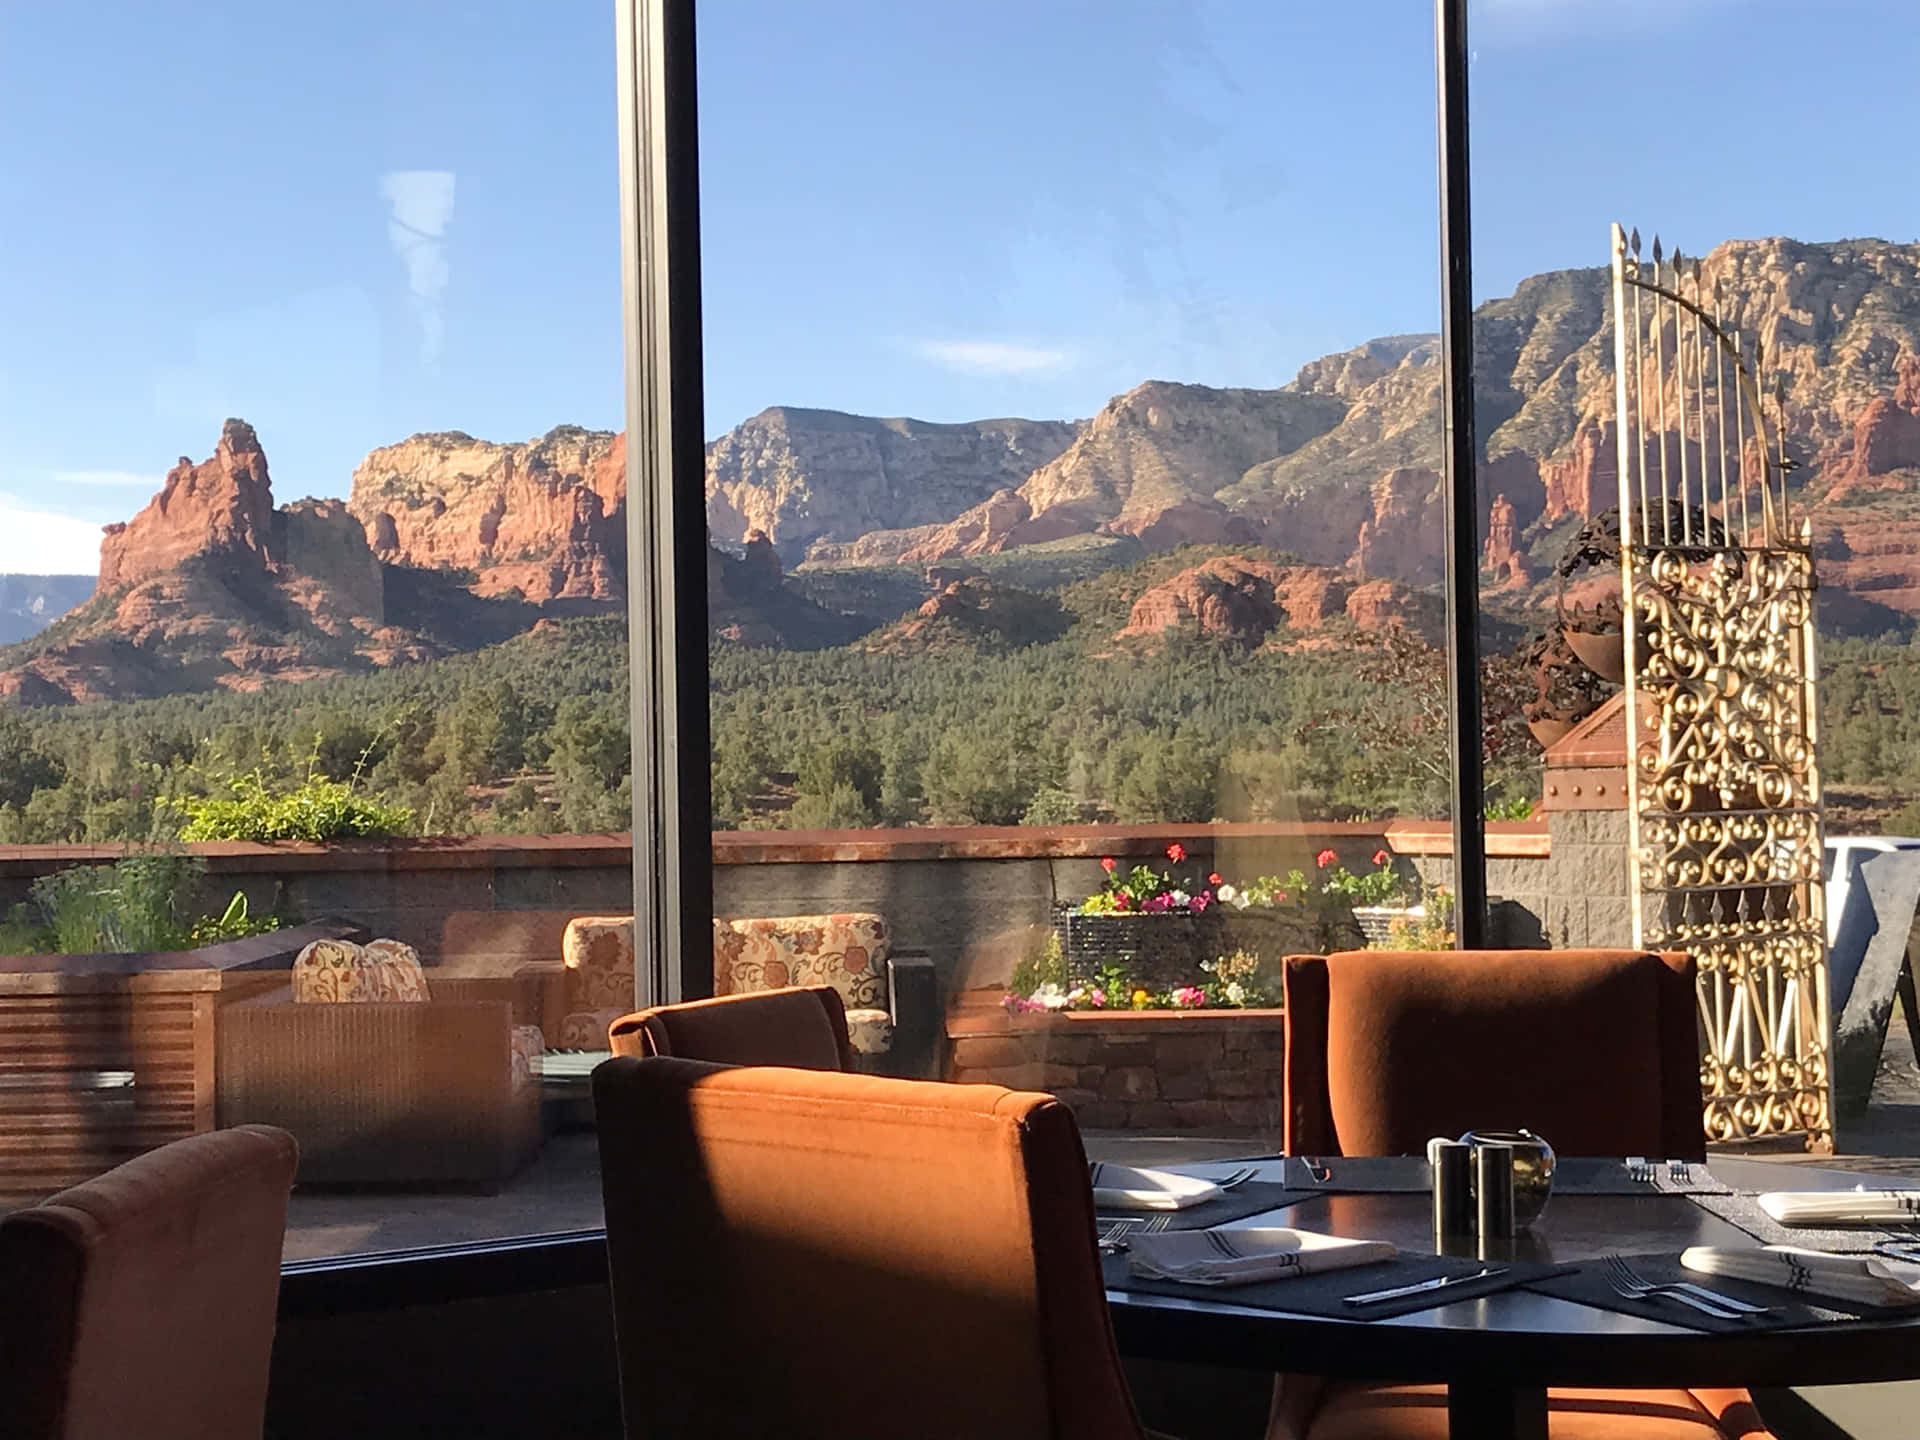 A View Of Mountains From A Restaurant